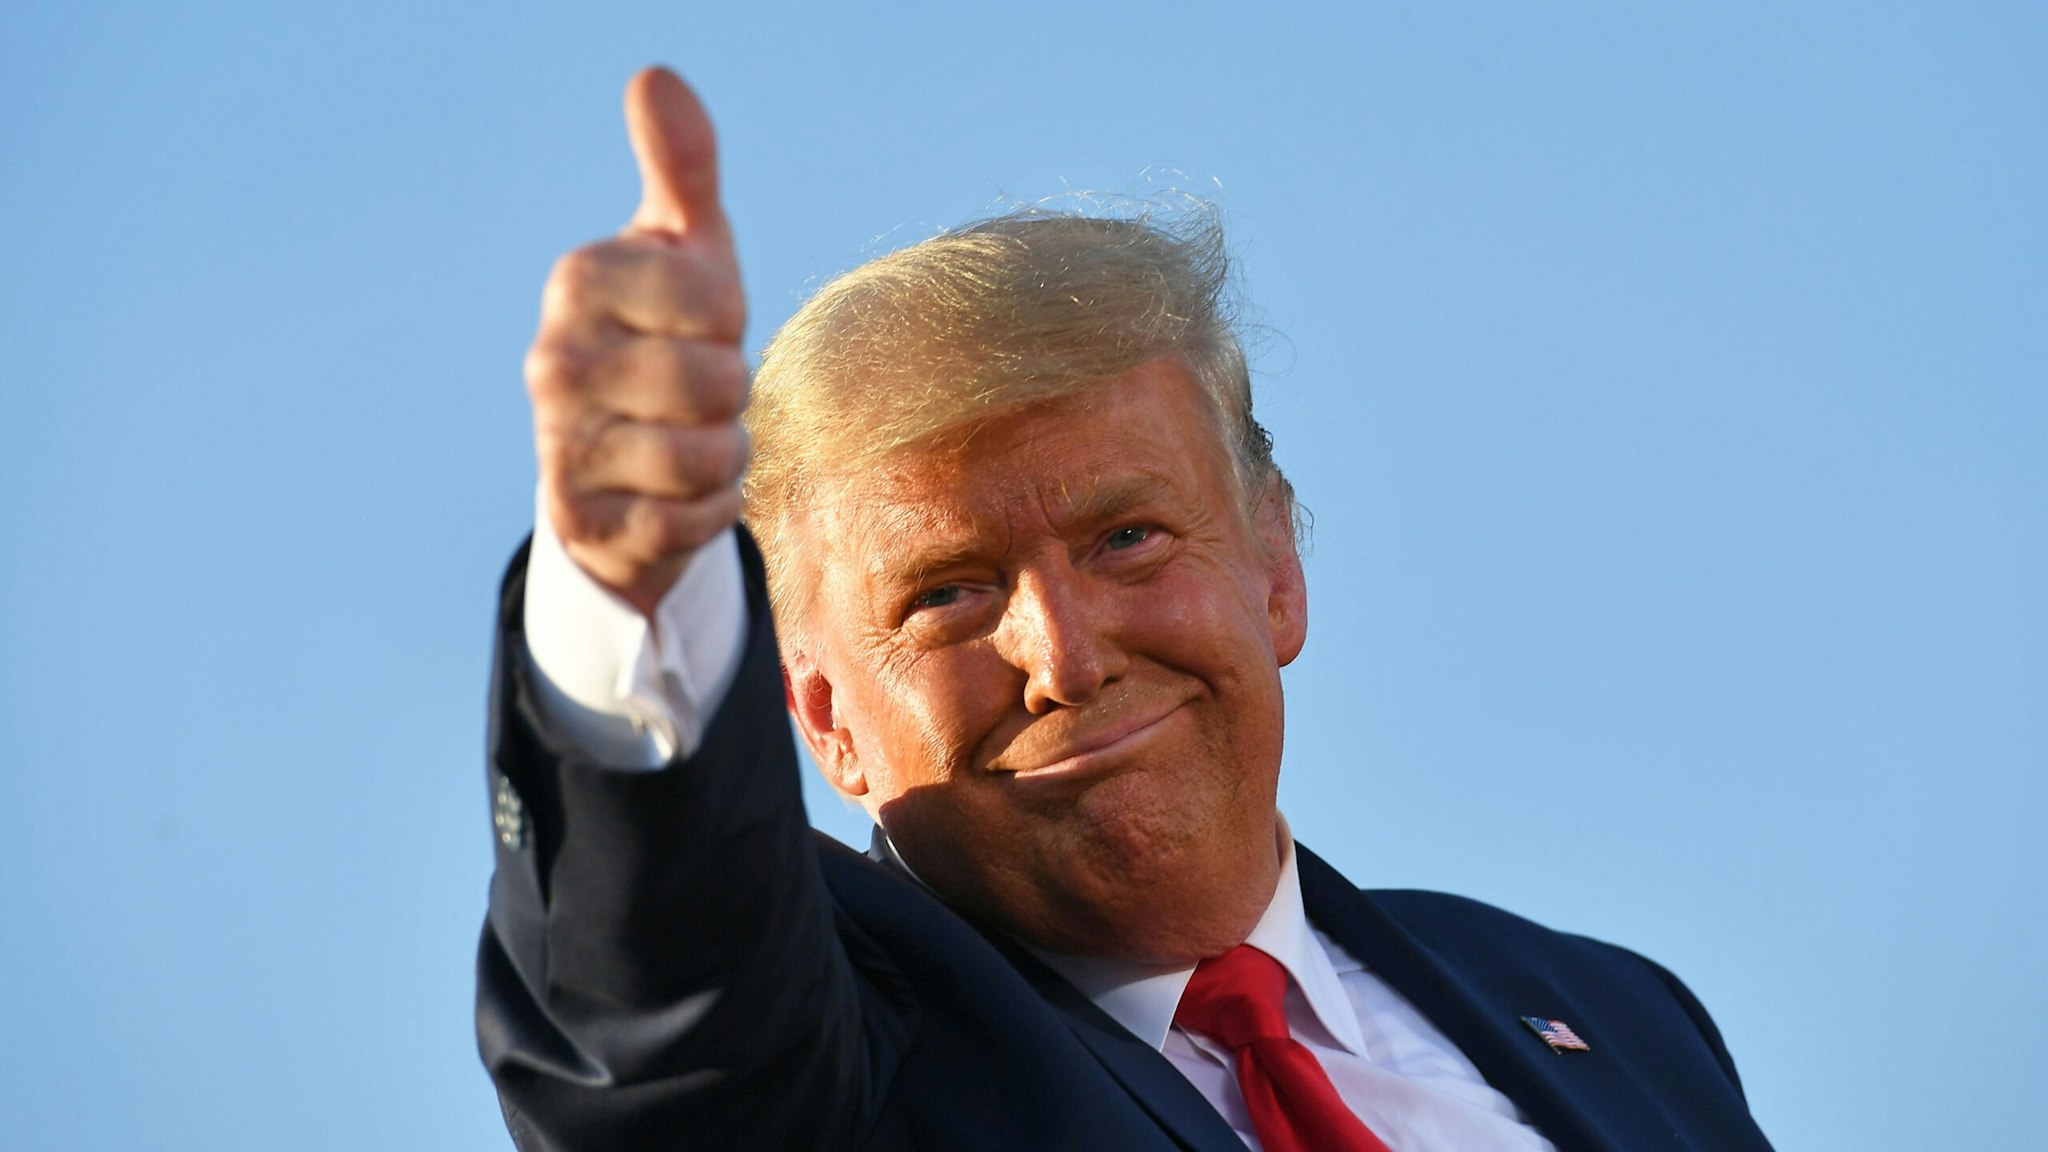 US President Donald Trump gives a thumbs up as he leaves a rally at Tucson International Airport in Tucson, Arizona on October 19, 2020. - US President Donald Trump went after top government scientist Anthony Fauci in a call with campaign staffers on October 19, 2020, suggesting the hugely respected and popular doctor was an "idiot."